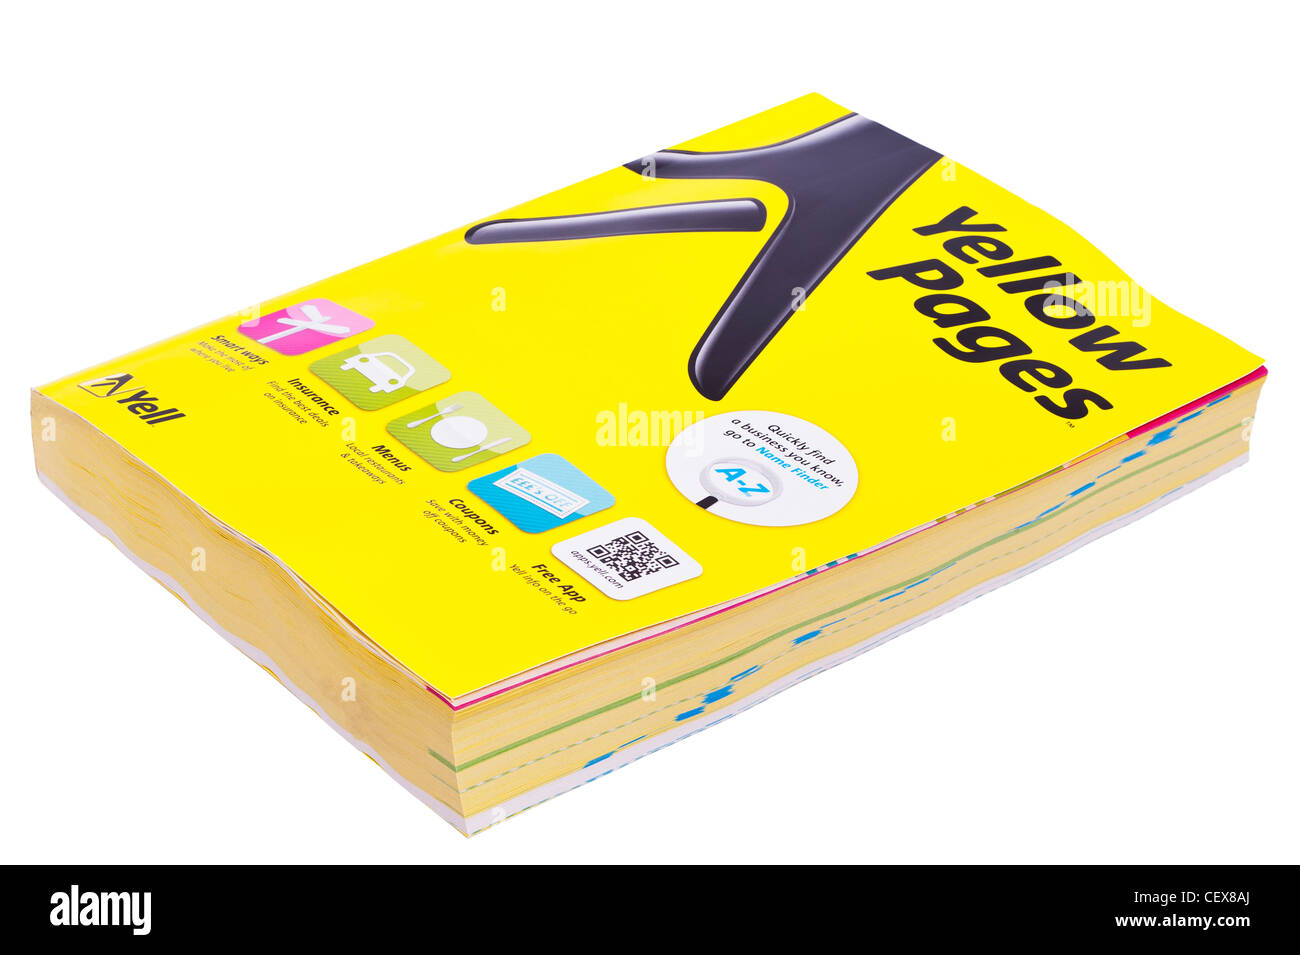 A Yell Yellow Pages directory on a white background Stock Photo